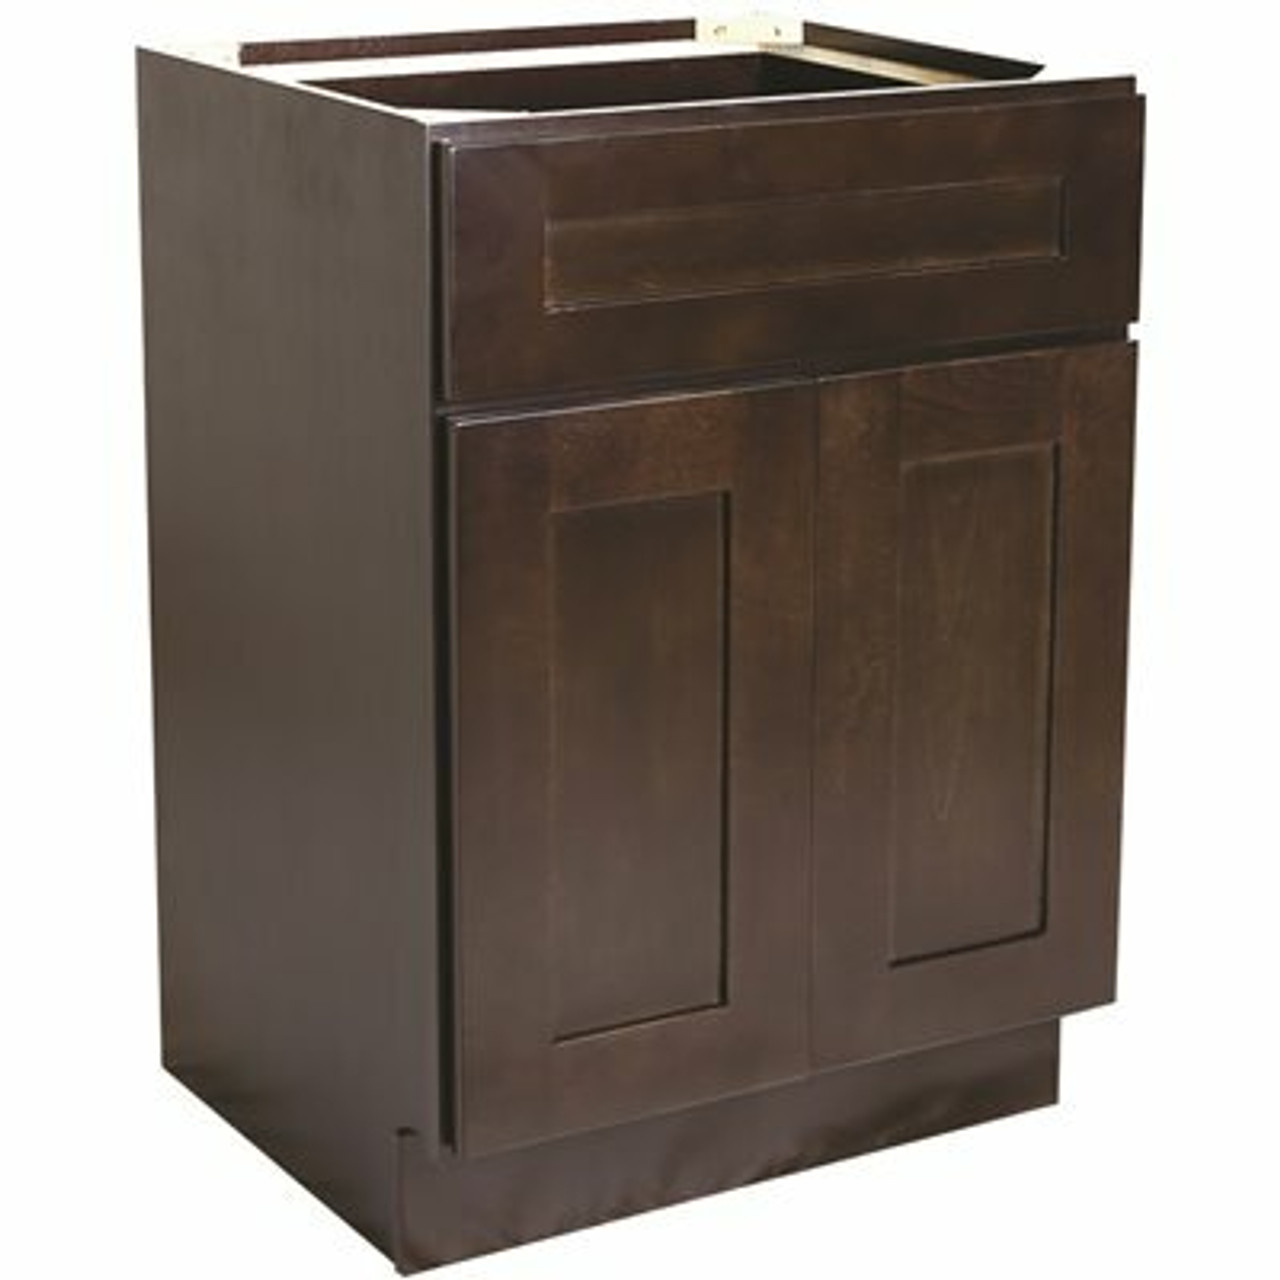 Design House Brookings Plywood Ready To Assemble Shaker 33X34.5X24 In. 2-Door 1-Drawer Base Kitchen Cabinet In Espresso